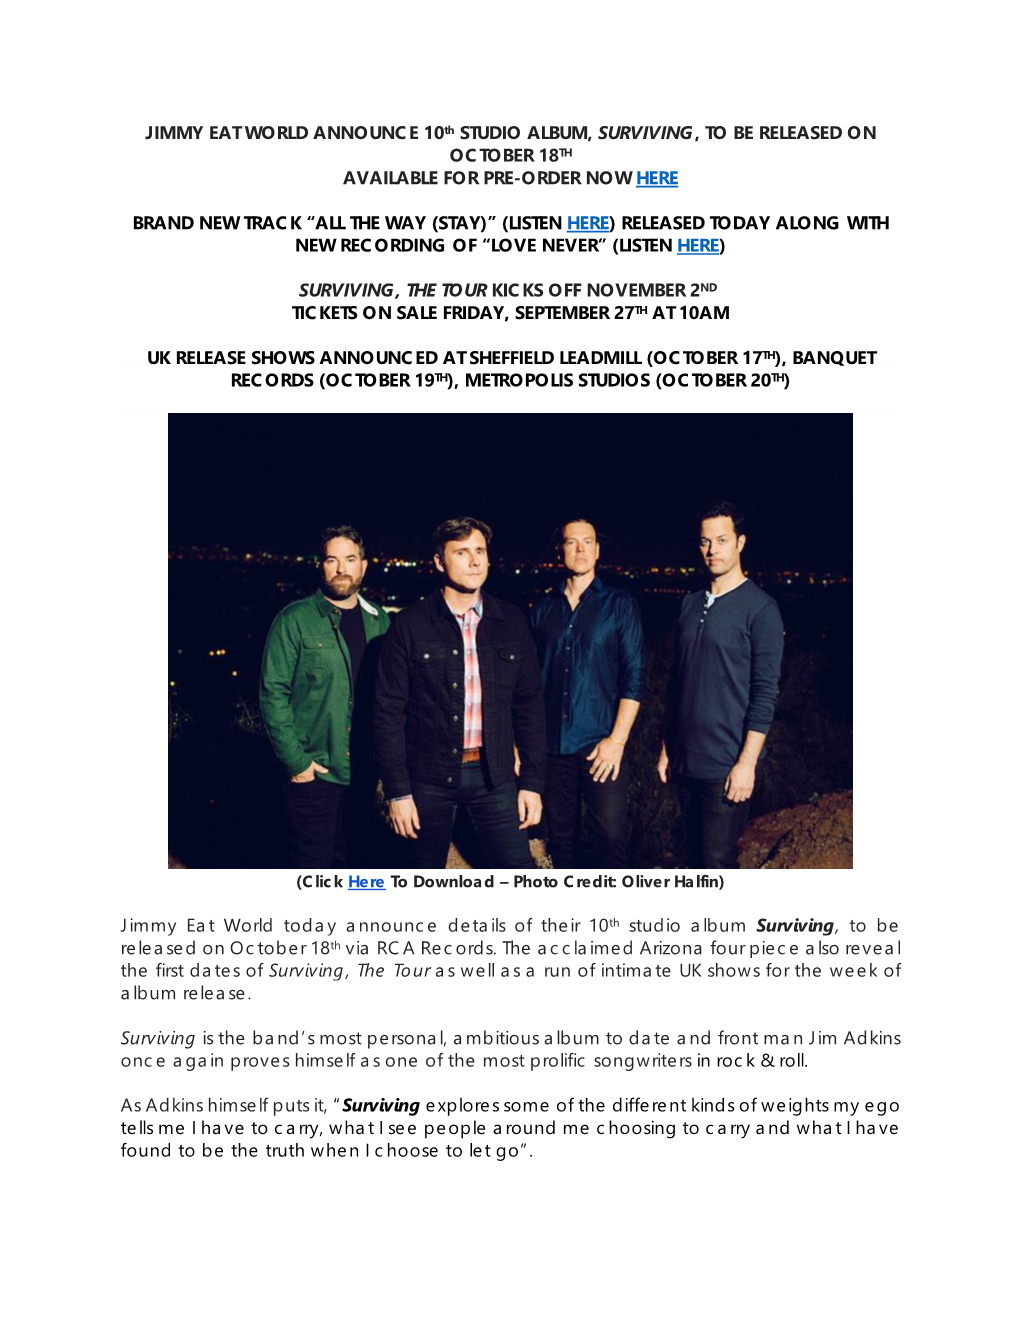 JIMMY EAT WORLD ANNOUNCE 10Th STUDIO ALBUM, SURVIVING, to BE RELEASED on OCTOBER 18TH AVAILABLE for PRE-ORDER NOW HERE